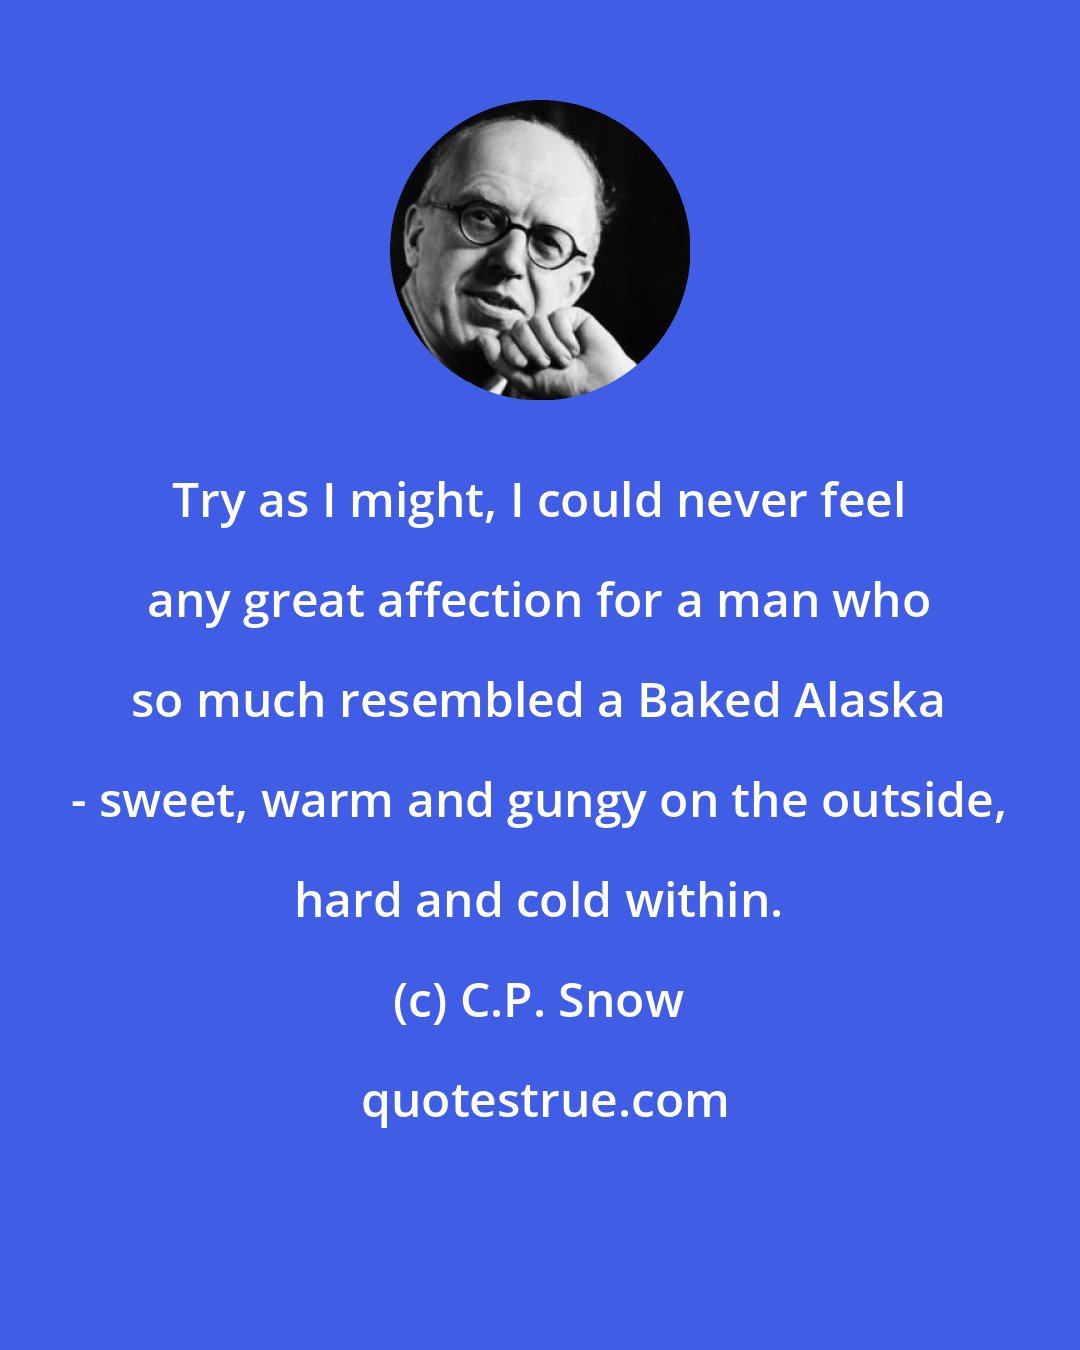 C.P. Snow: Try as I might, I could never feel any great affection for a man who so much resembled a Baked Alaska - sweet, warm and gungy on the outside, hard and cold within.